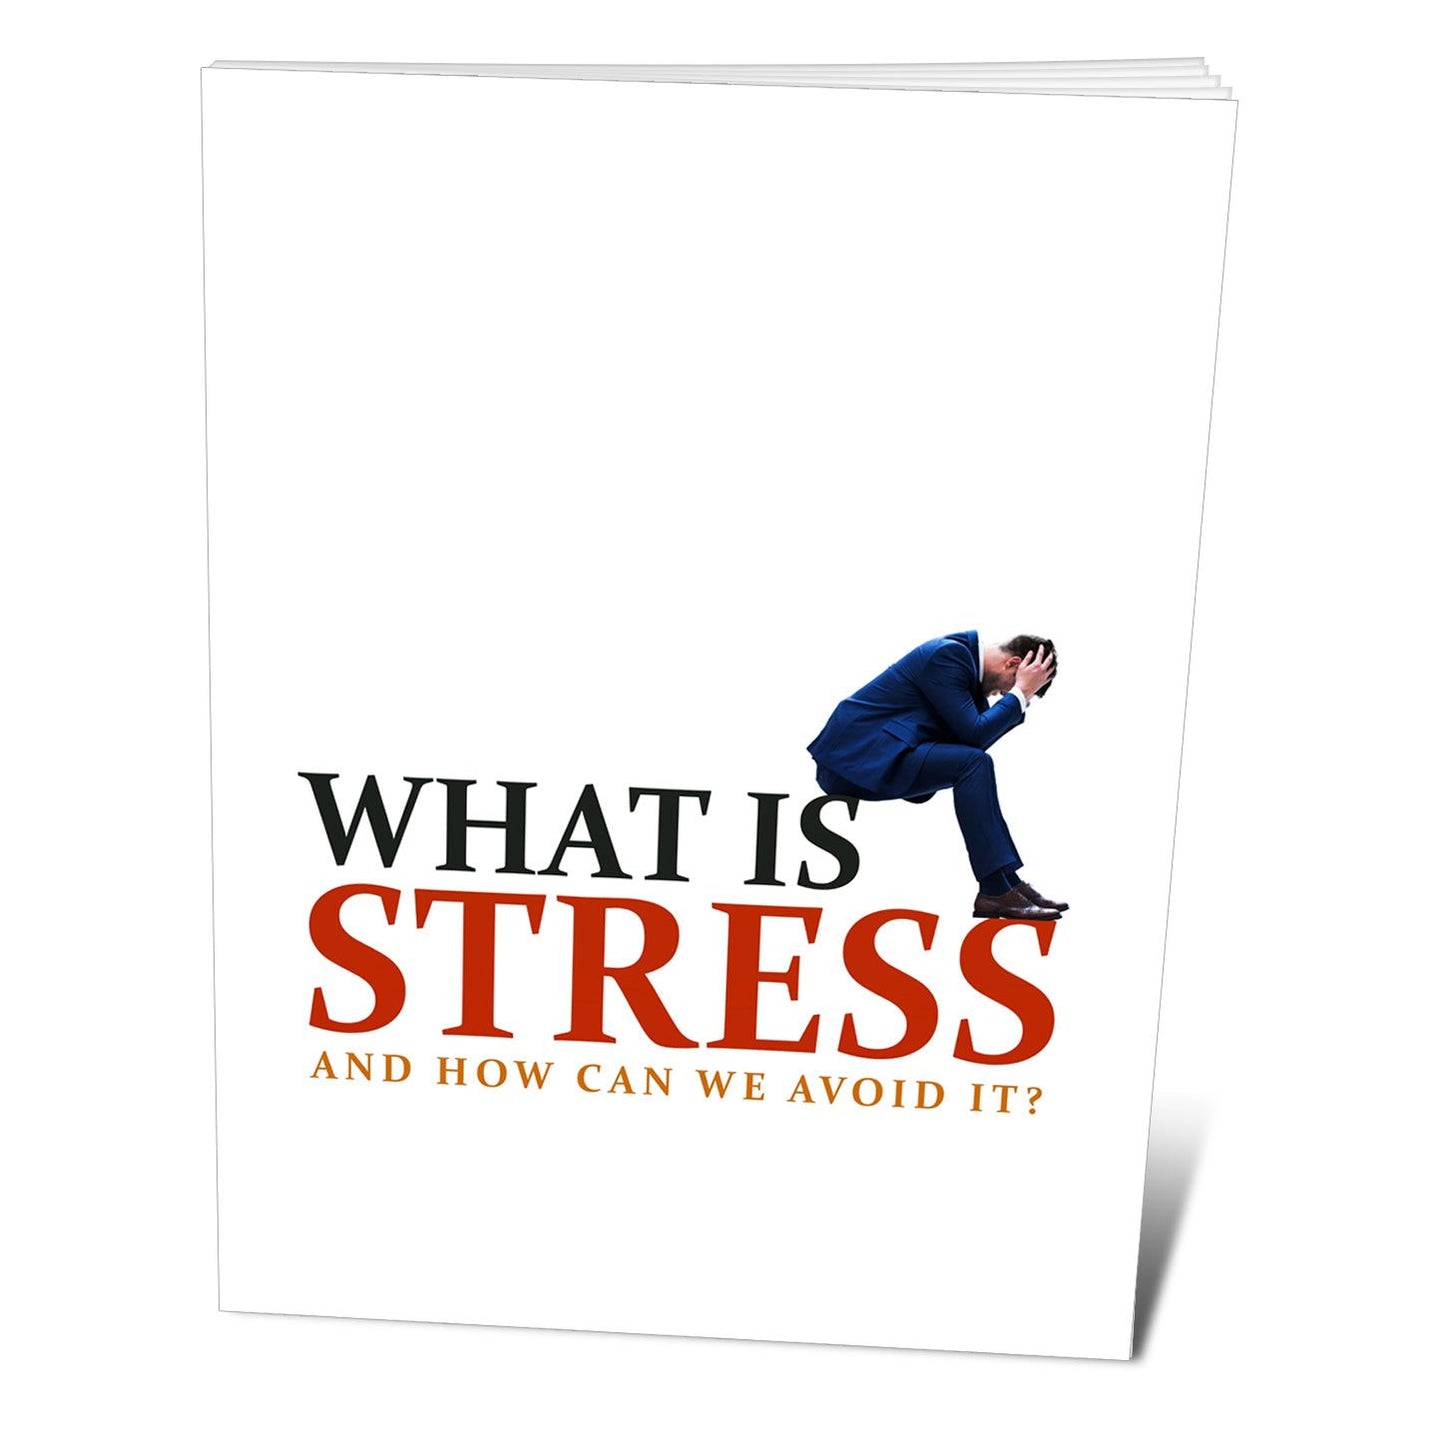 What Is Stress And How Can We Avoid It - PLR